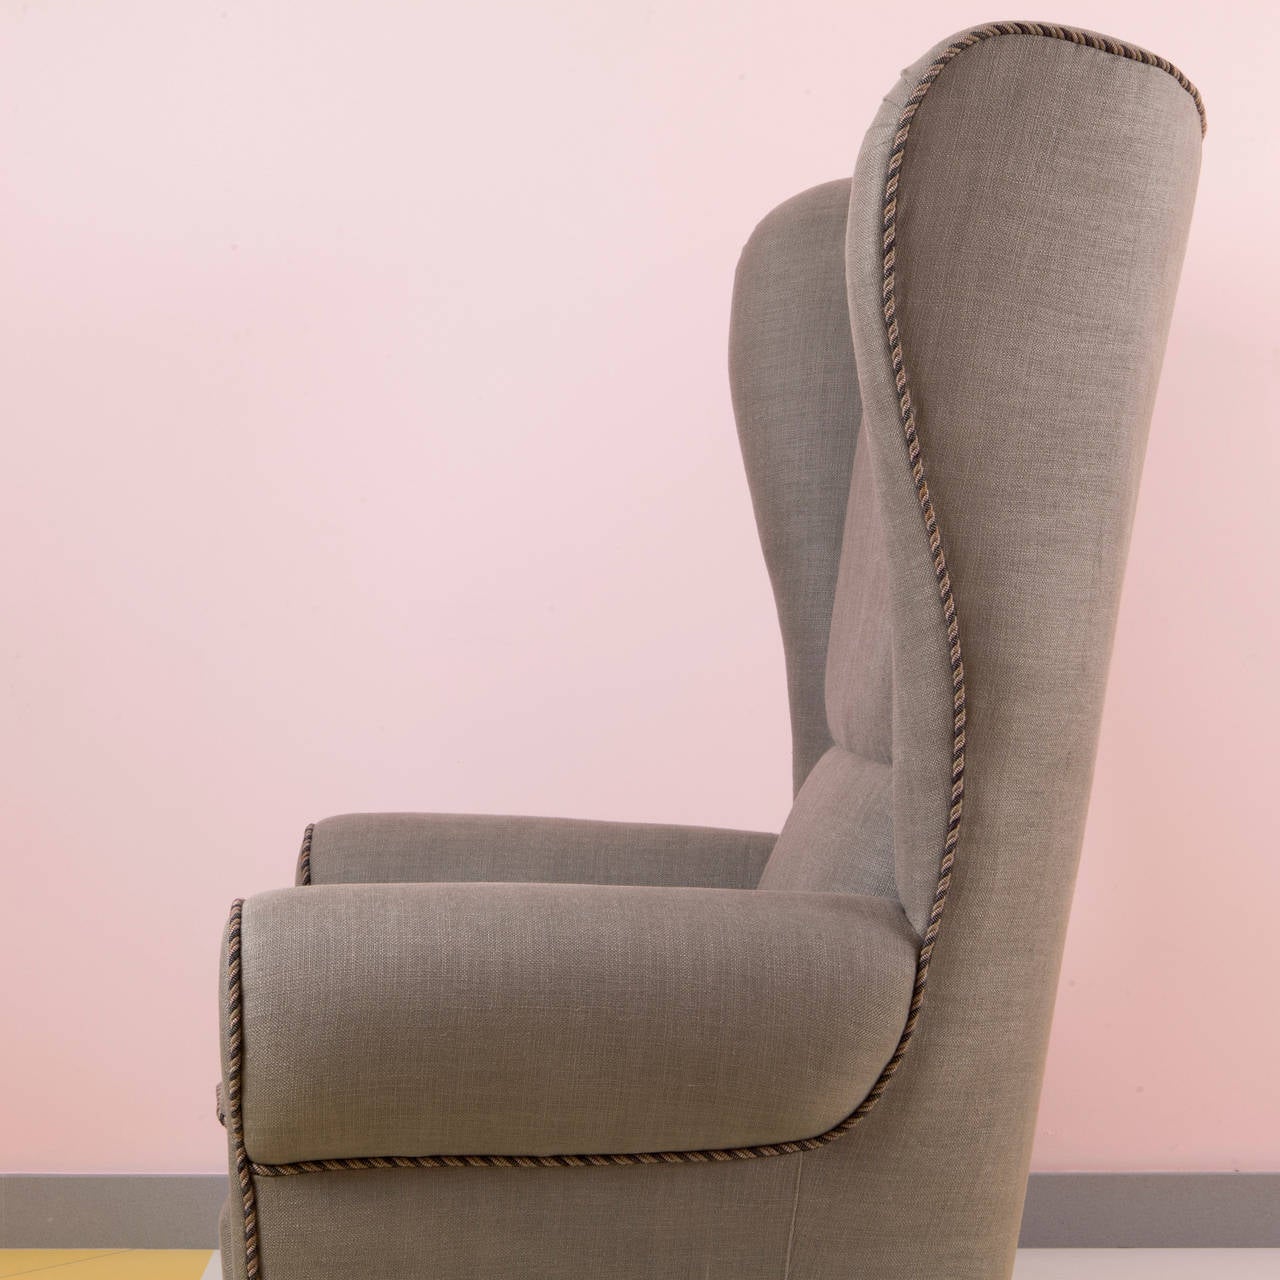 Important armchair designed by Guglielmo Ulrich, manufactured in Italy in the 1940s. Wooden structure, upholstered and covered with linen fabric and elegant cotton seam allowance. The feet are covered with the original fabric. Completely restored.